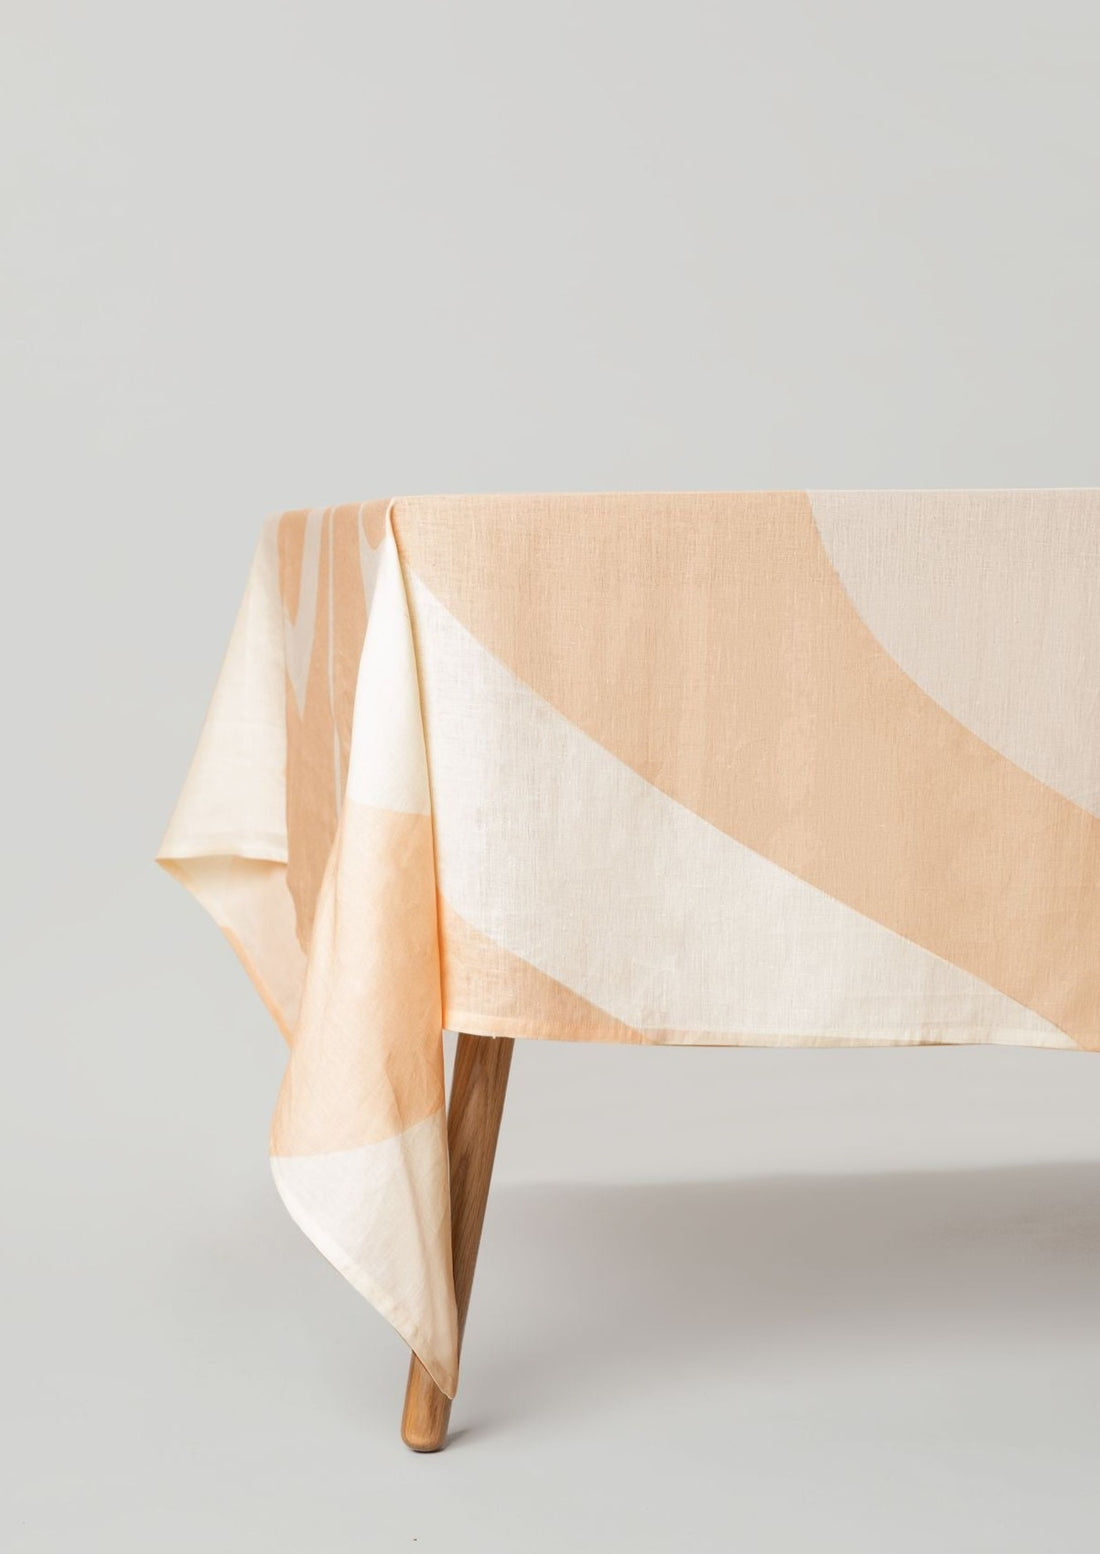 Handmade Linen Tablecloth in Sand by Misette